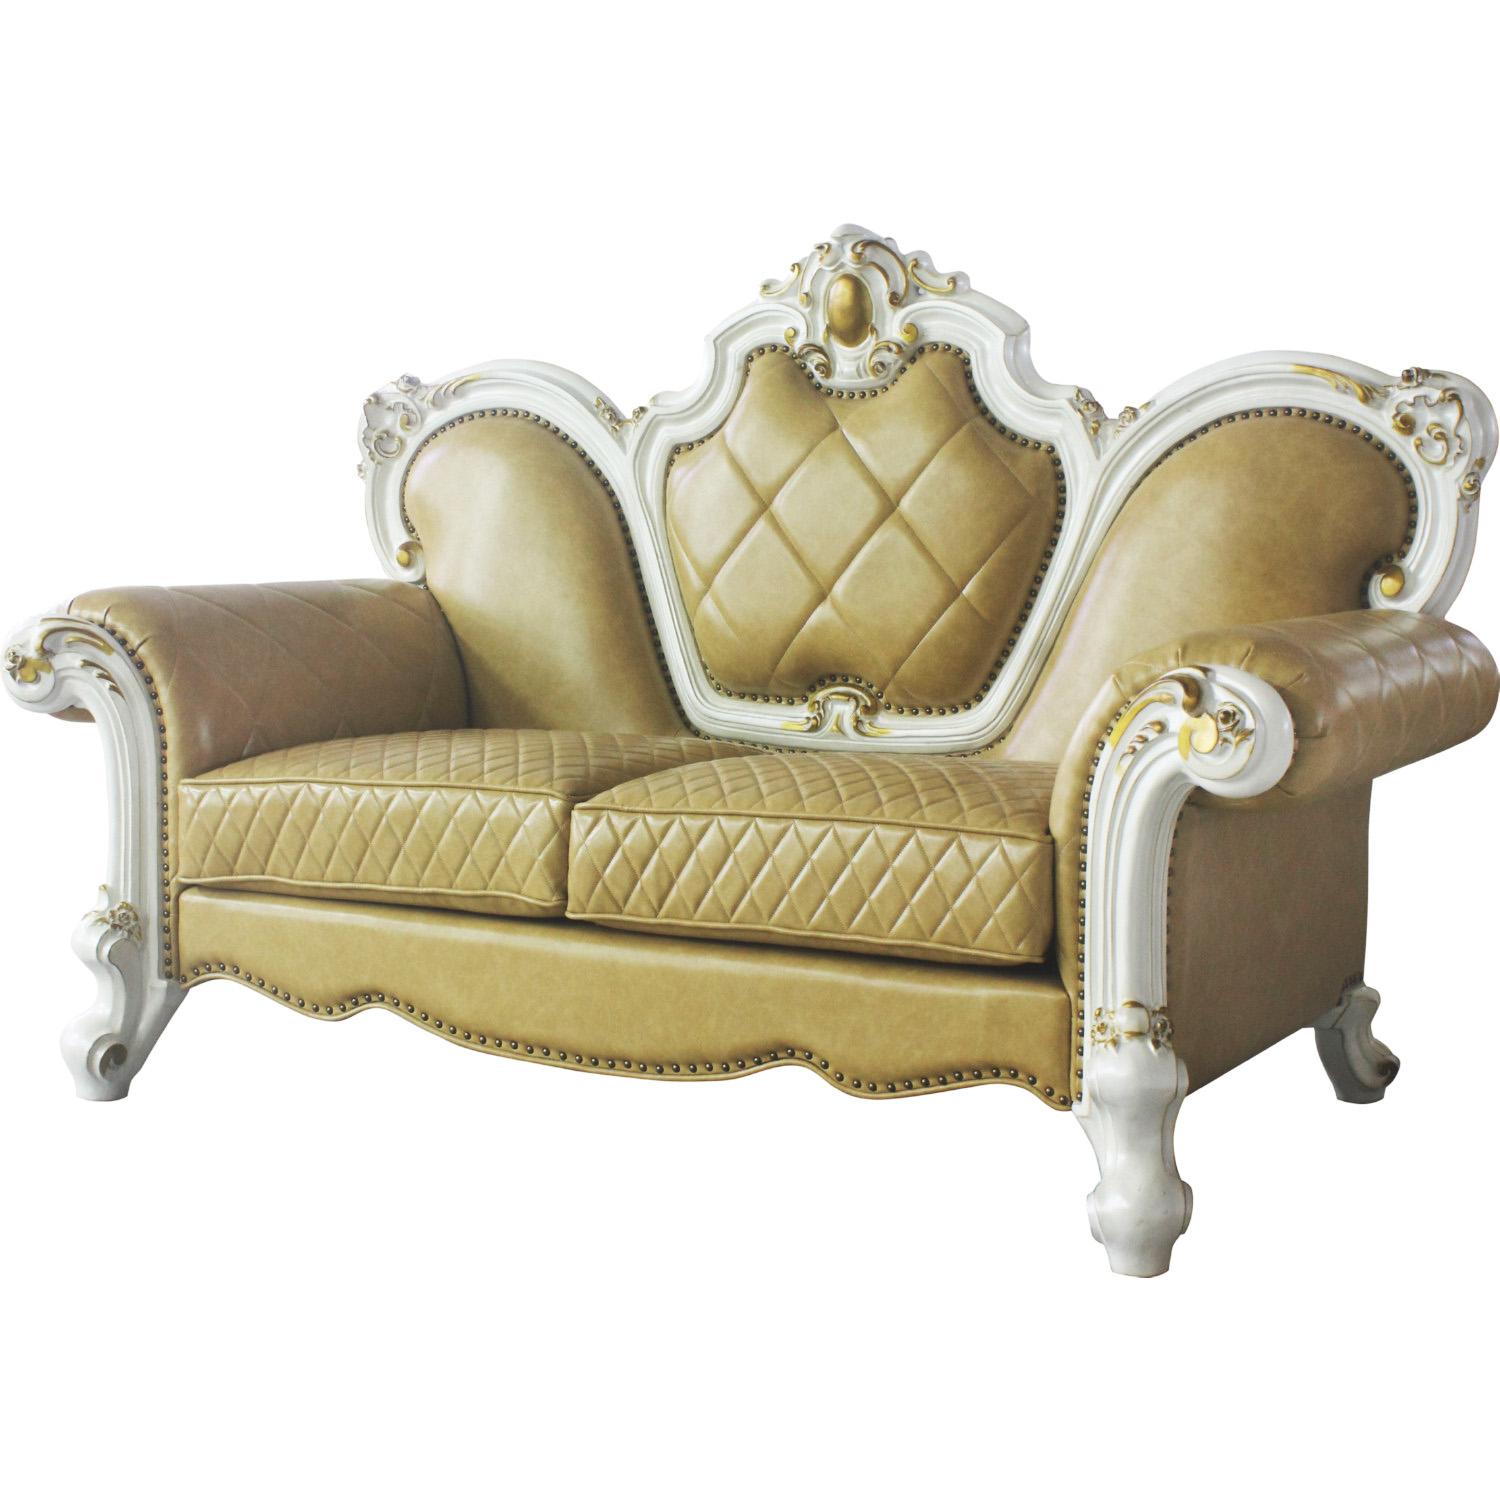 Classic, Traditional Loveseat Picardy 58211 58211-Picardy in Pearl, Antique, Yellow PU